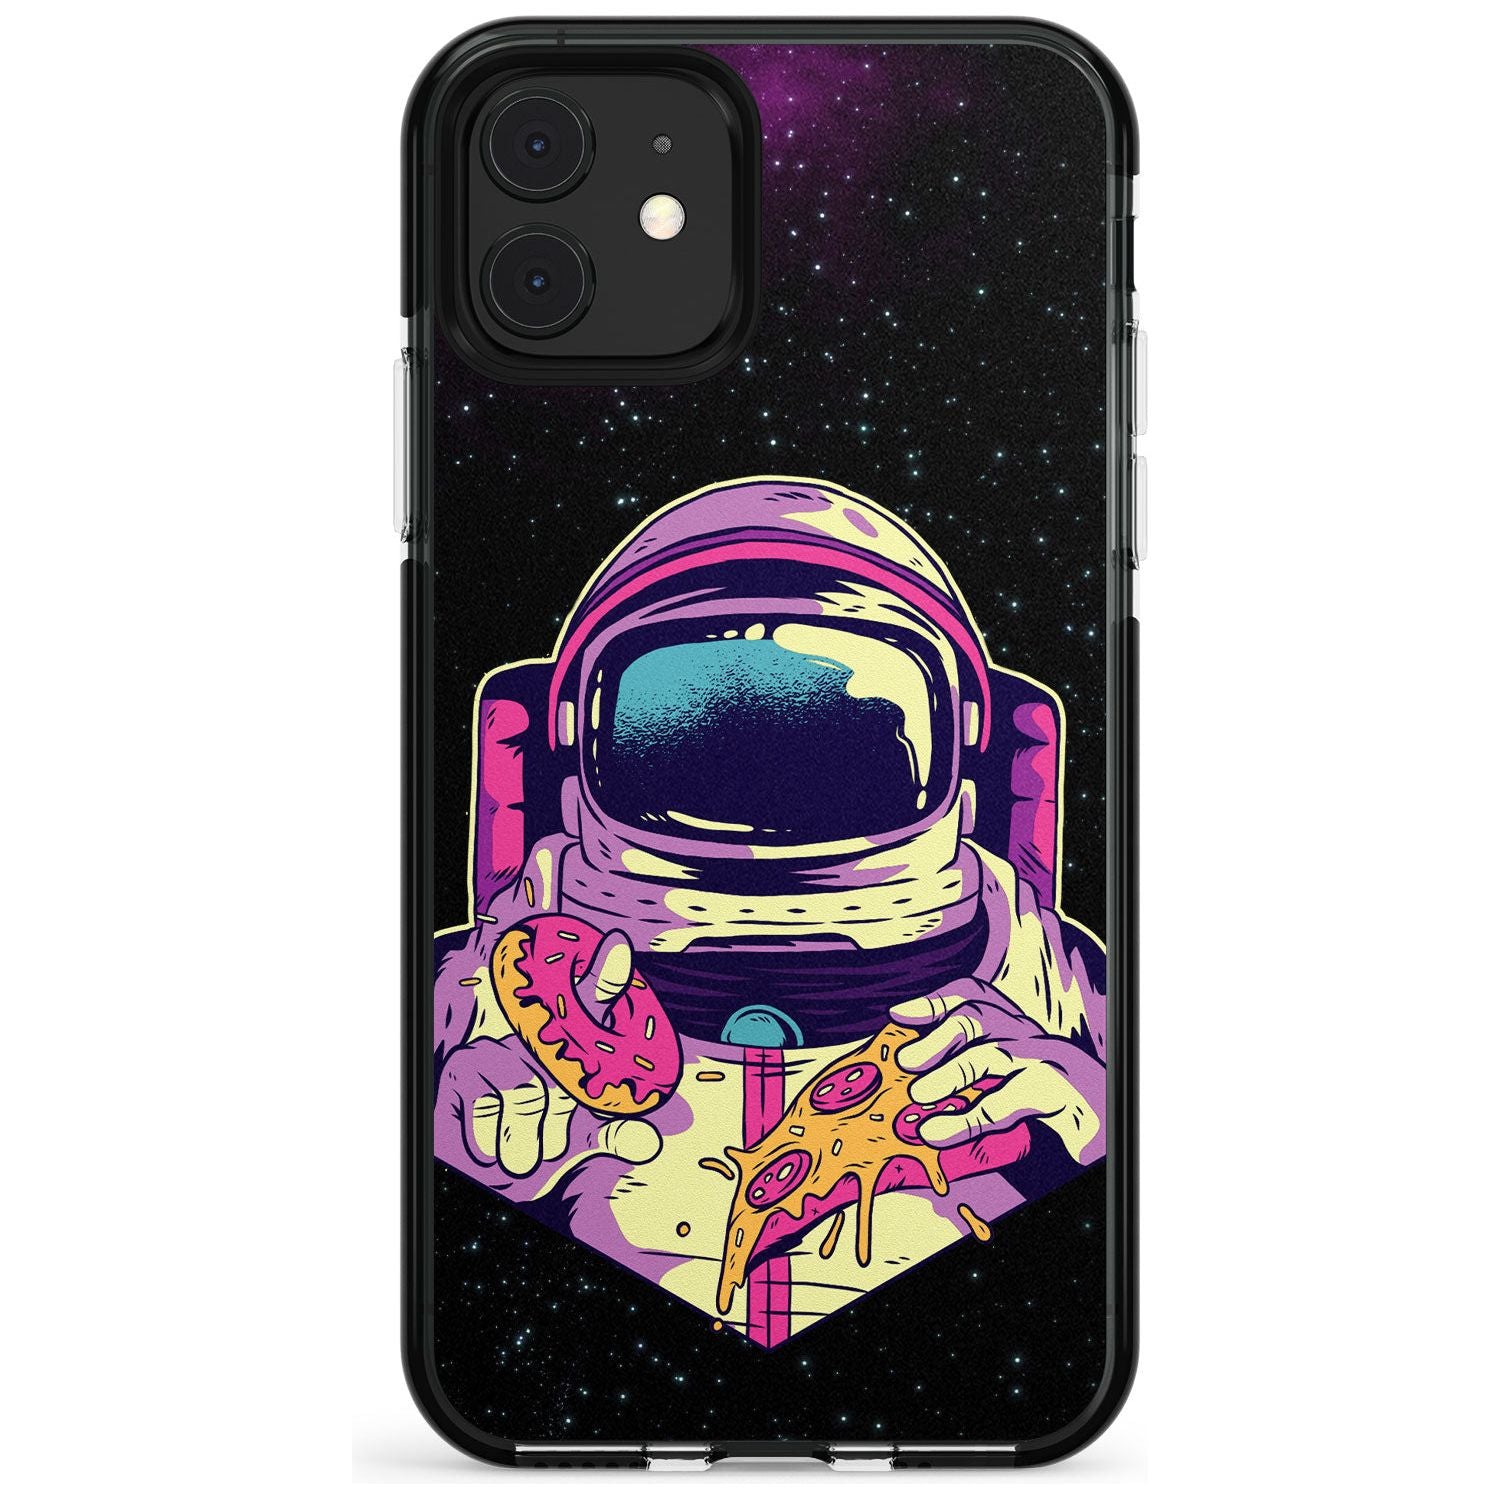 Astro Cheat Meal Black Impact Phone Case for iPhone 11 Pro Max